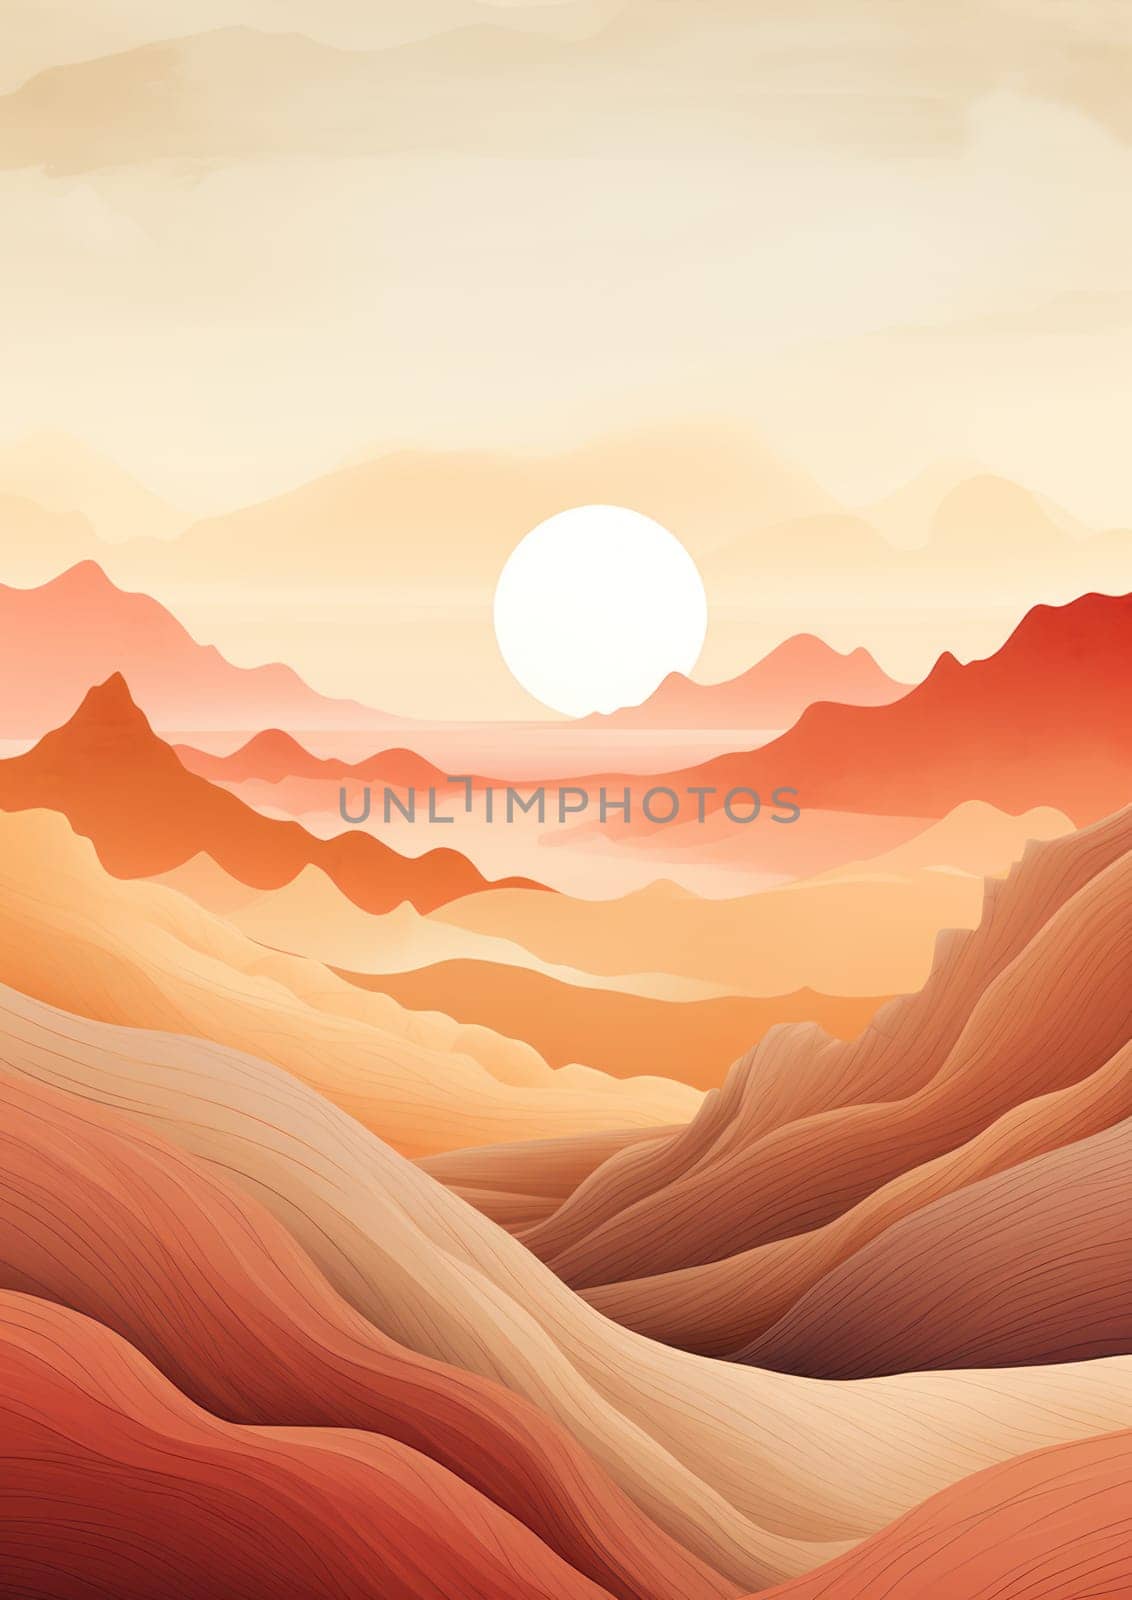 Silhouette of Majestic Mountains: A Tranquil Sunrise Over the Colorful Landscape by Vichizh